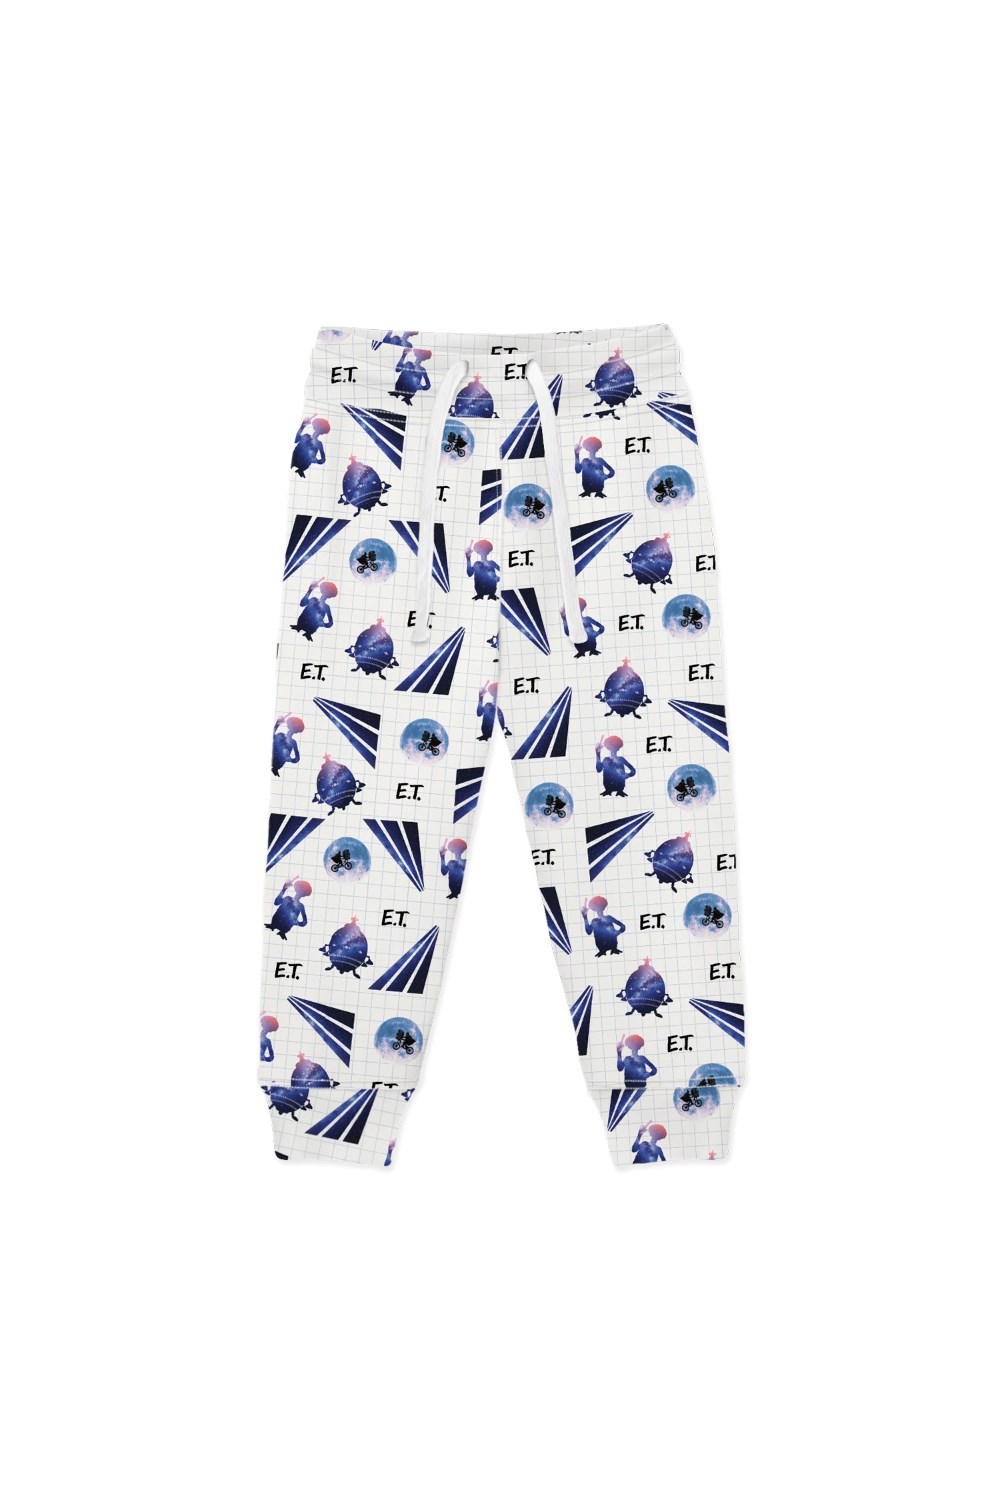 E. T. The Extra Terrestrial 03 Kids Trousers -